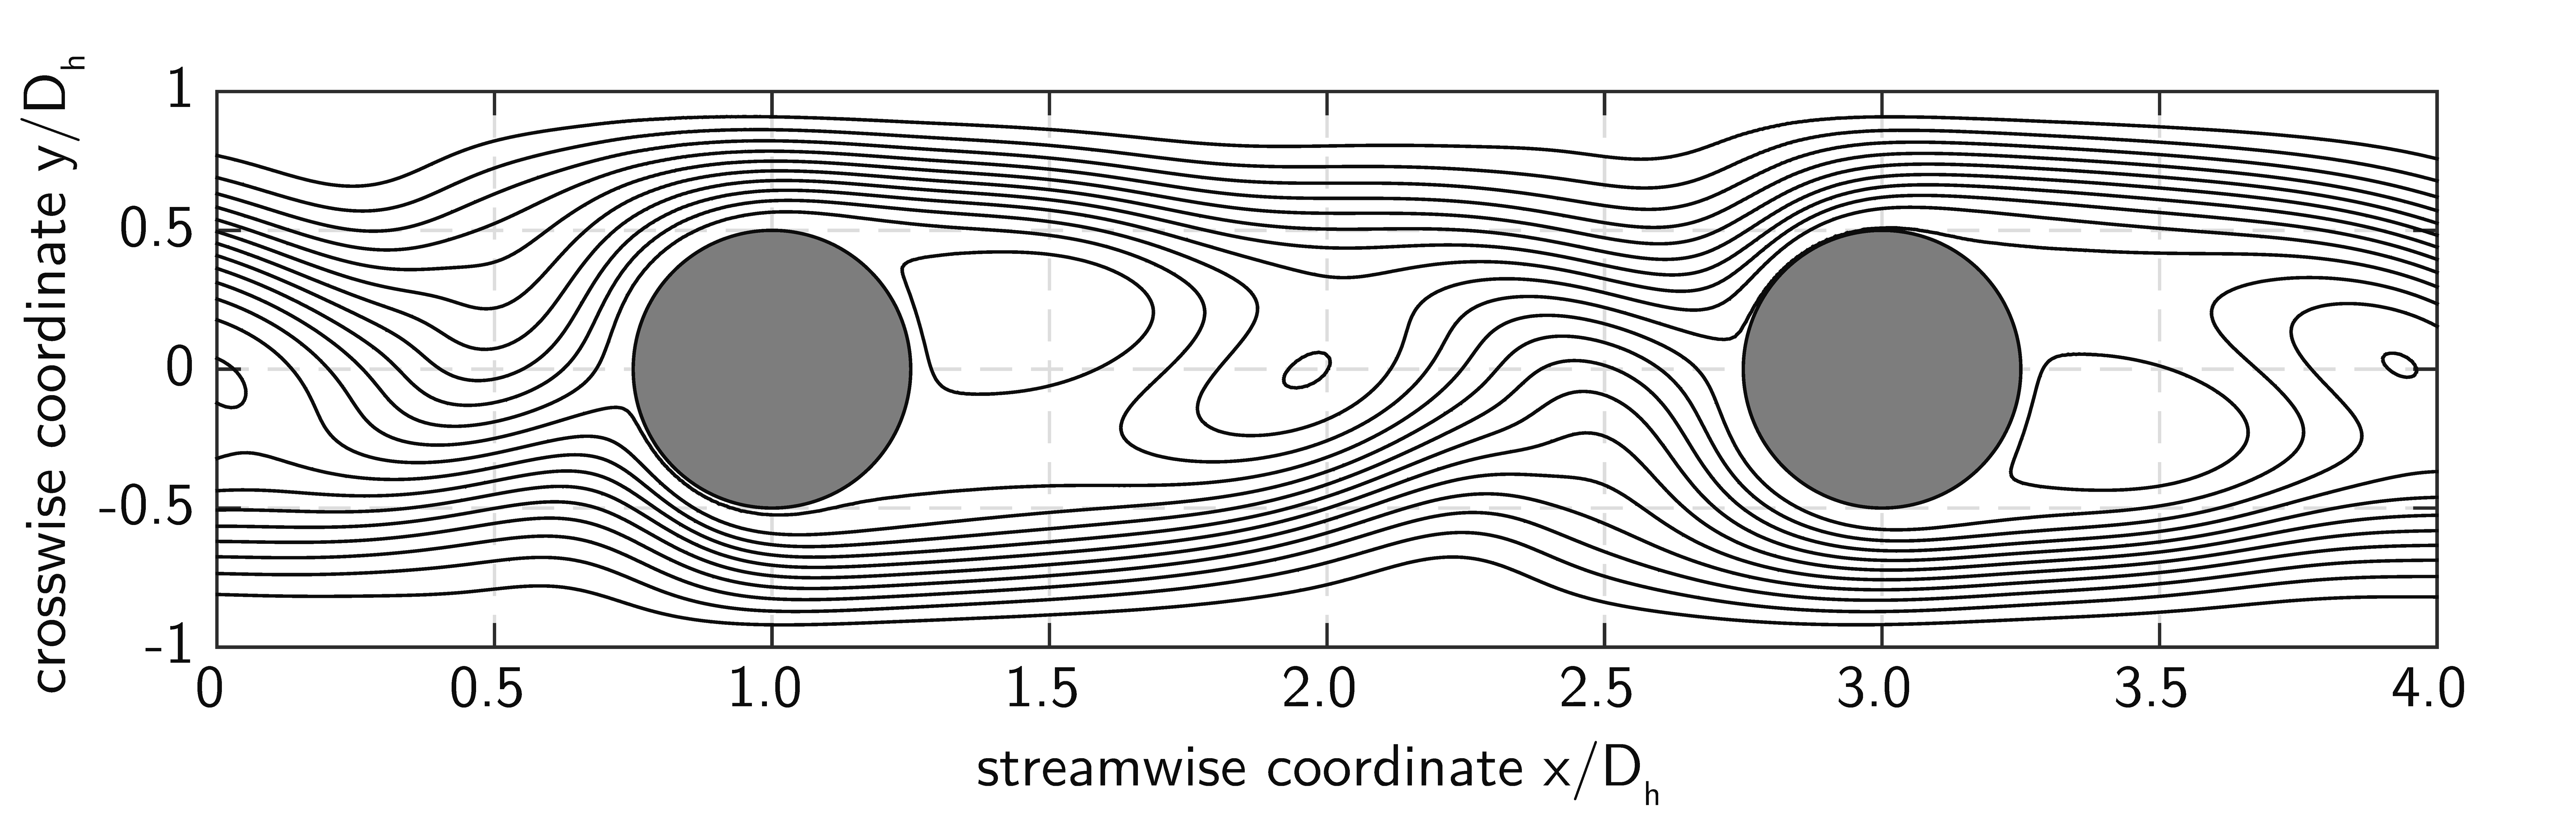 Streamlines of the instantanous flow field for Re=400 . Periodic, alternating vortices shed behind consecutive cylinders. Wall attached vortieces arise, which periodically shed from the wall and transport liquid convectively to the duct center.